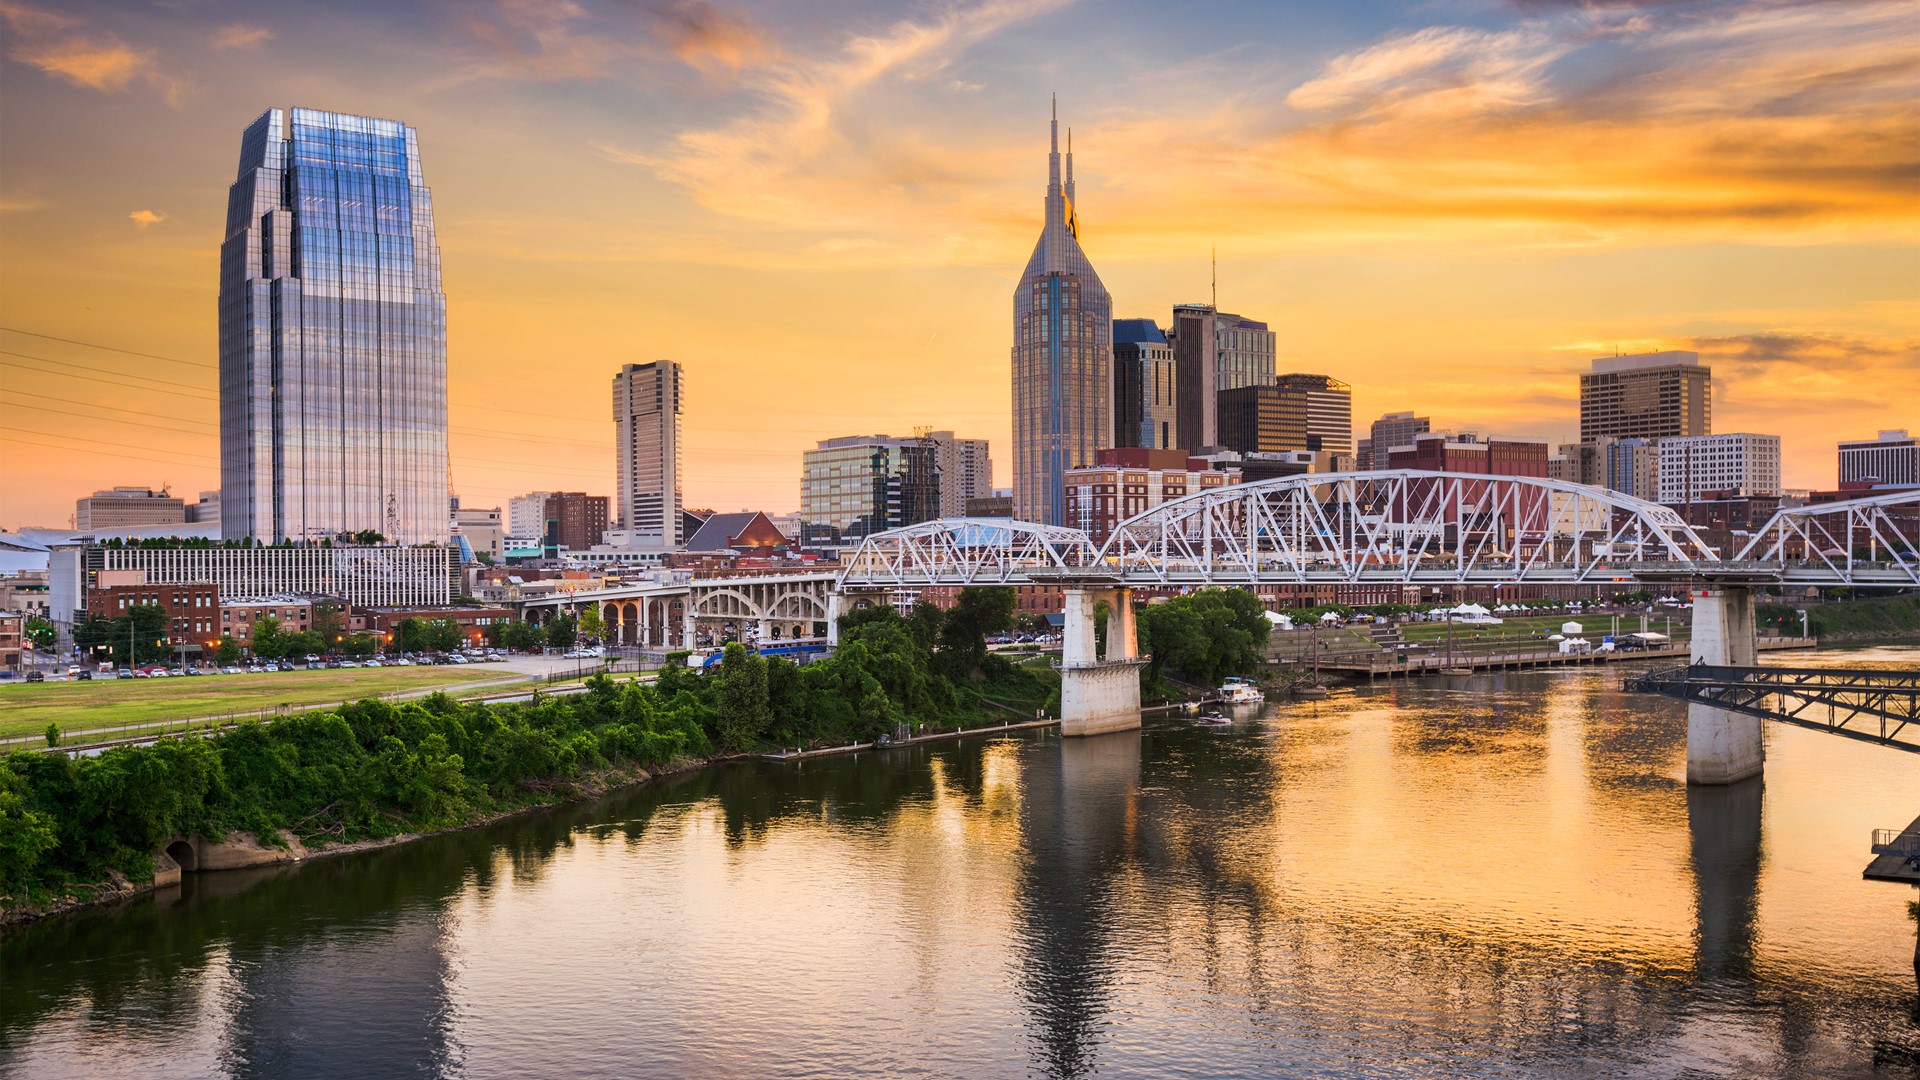 While Tennessee scored high marks for business and economy, CNBC ranked it as one of the worst states in the country for livability due to crime and discrimination.